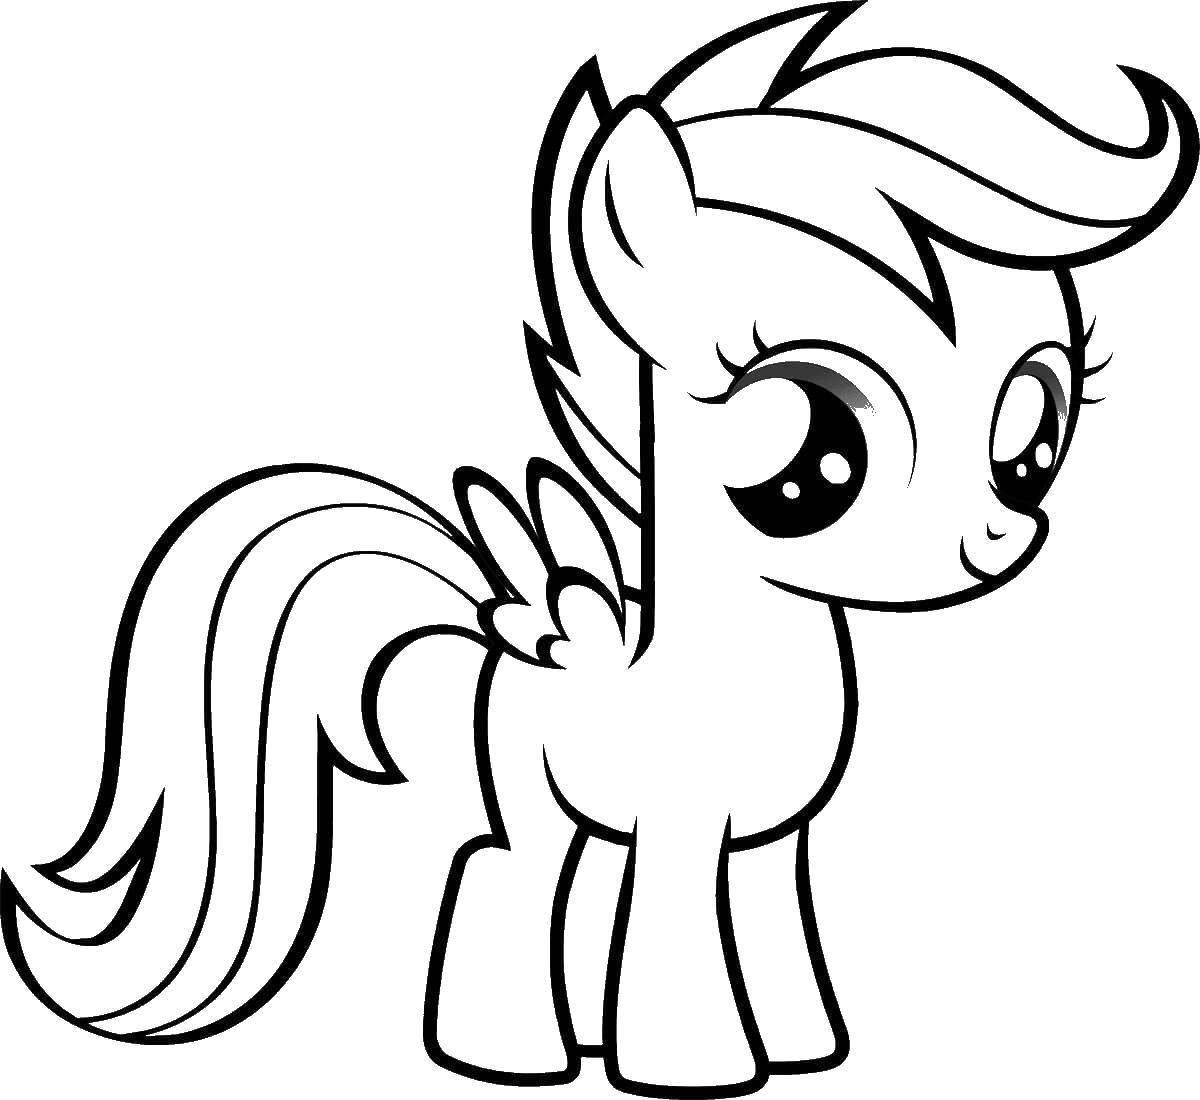 Coloring Little pony. Category Ponies. Tags:  Pony, My little pony.